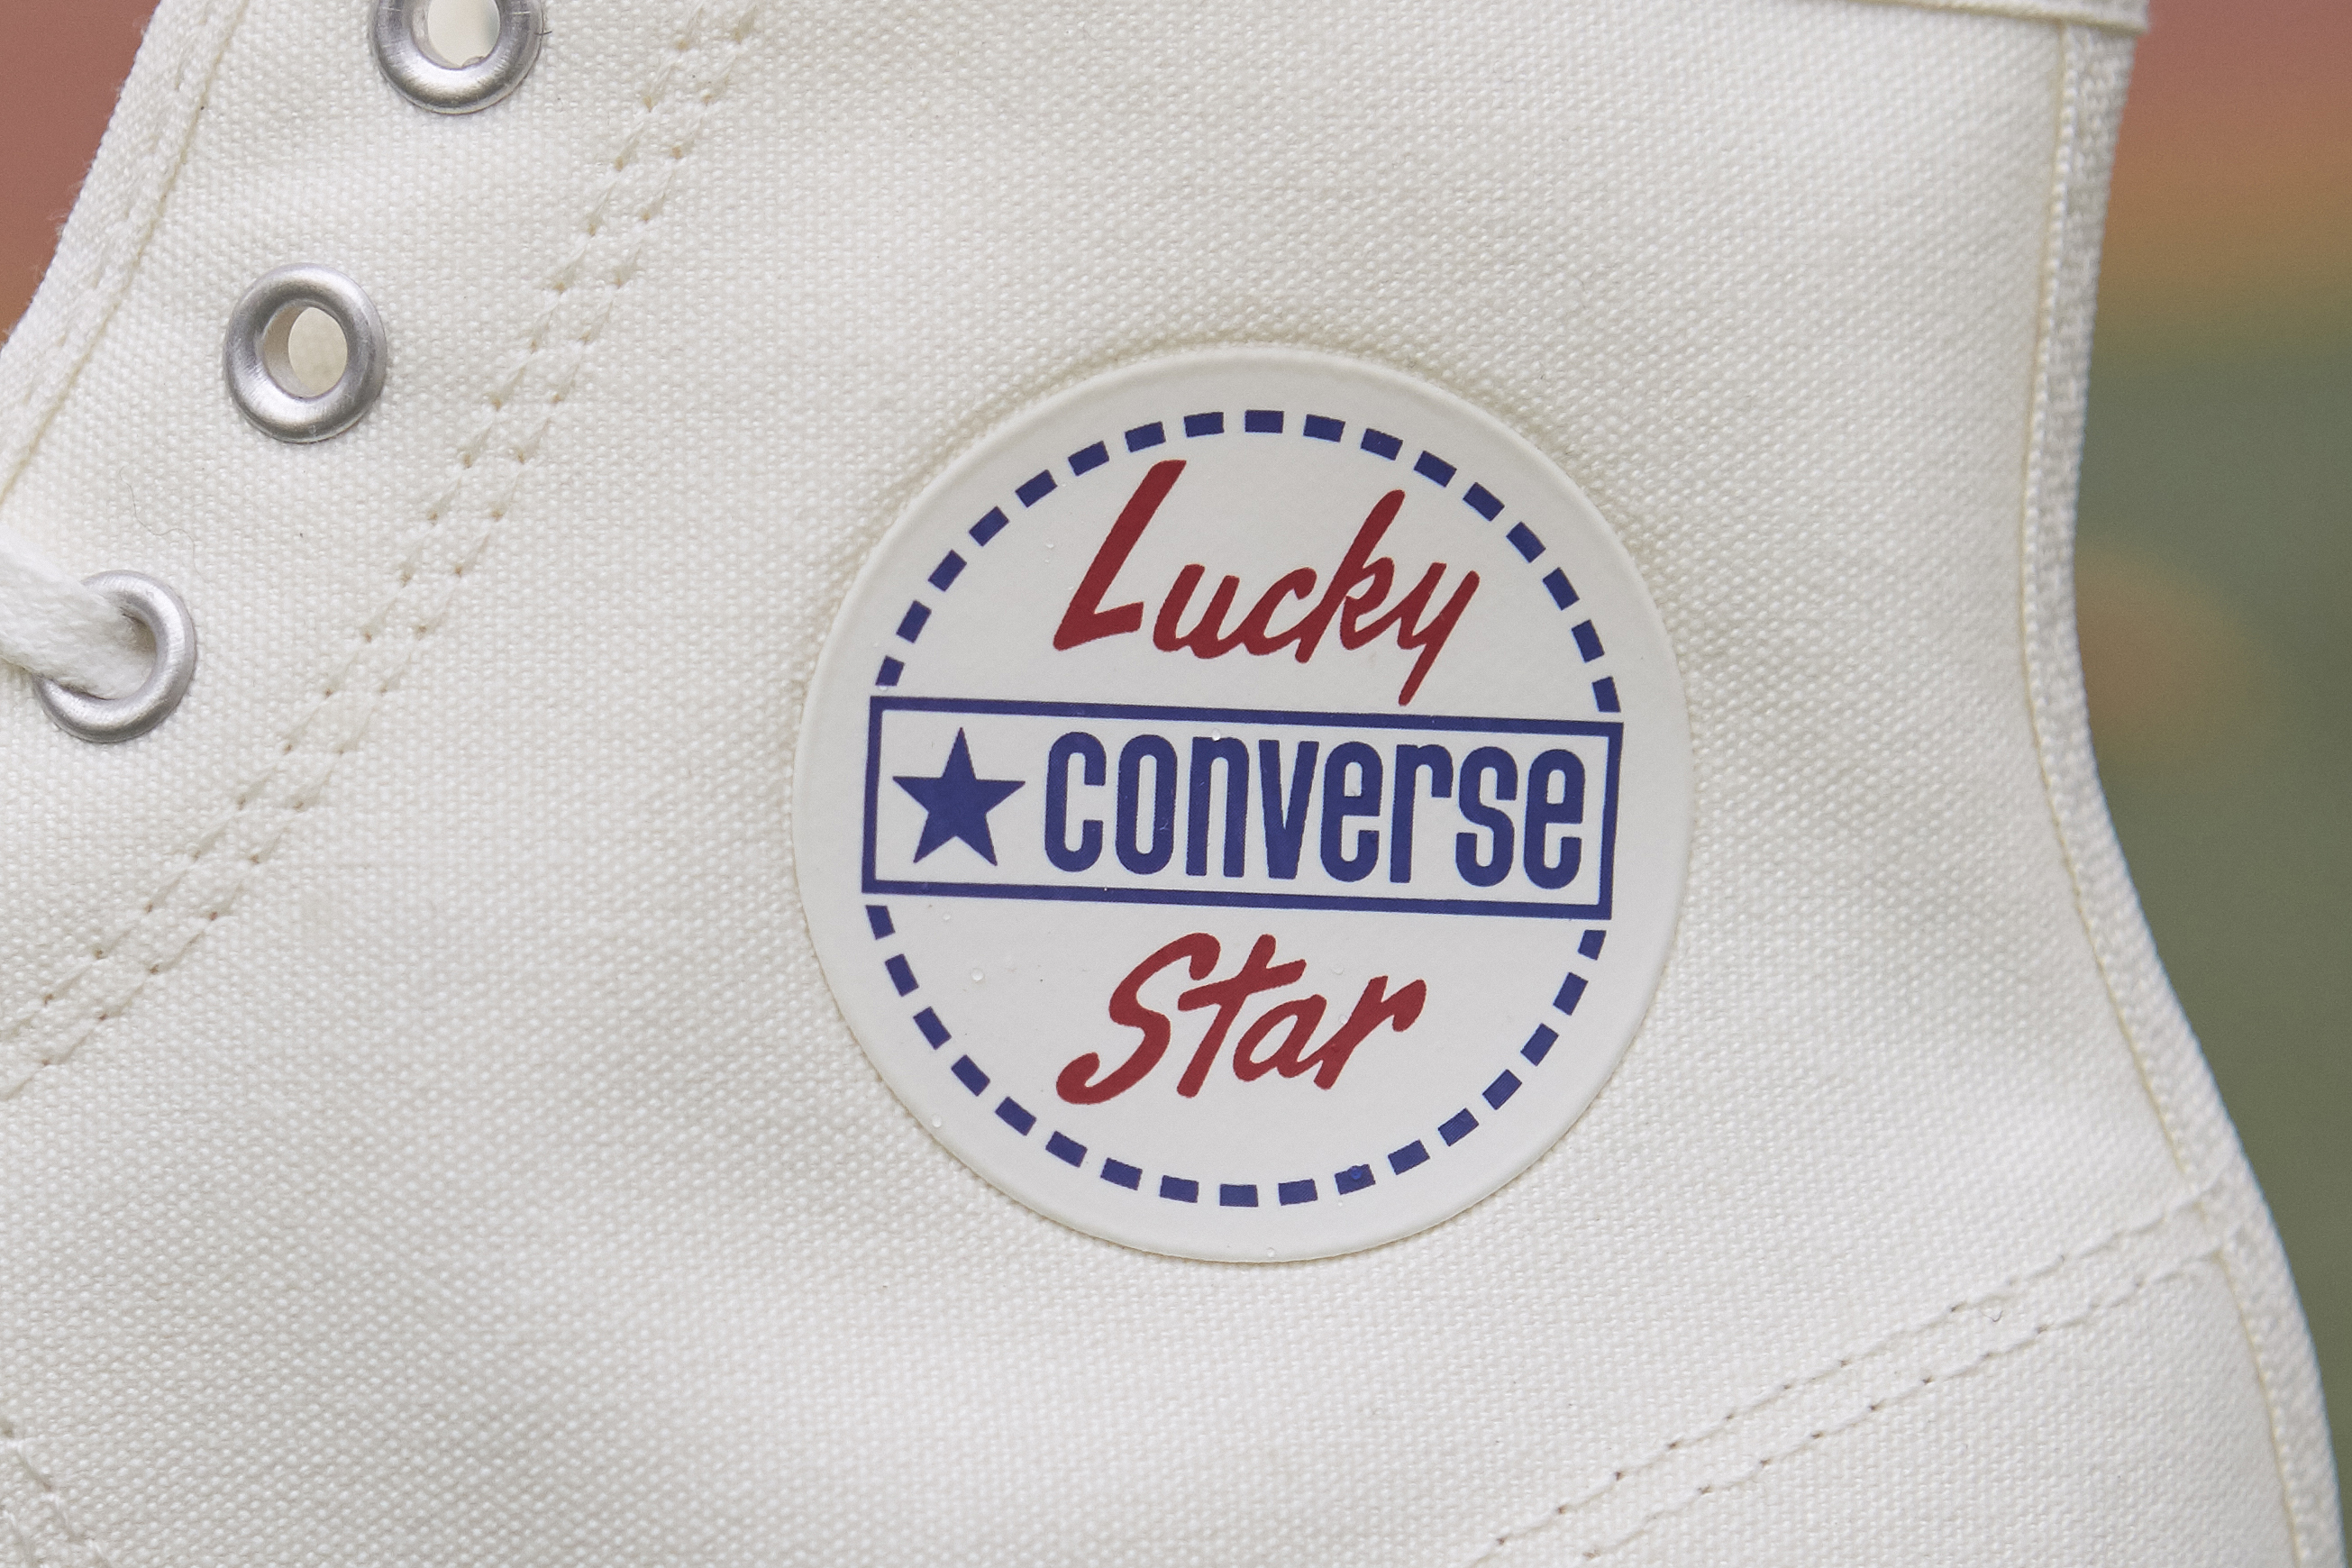 converse lucky star review